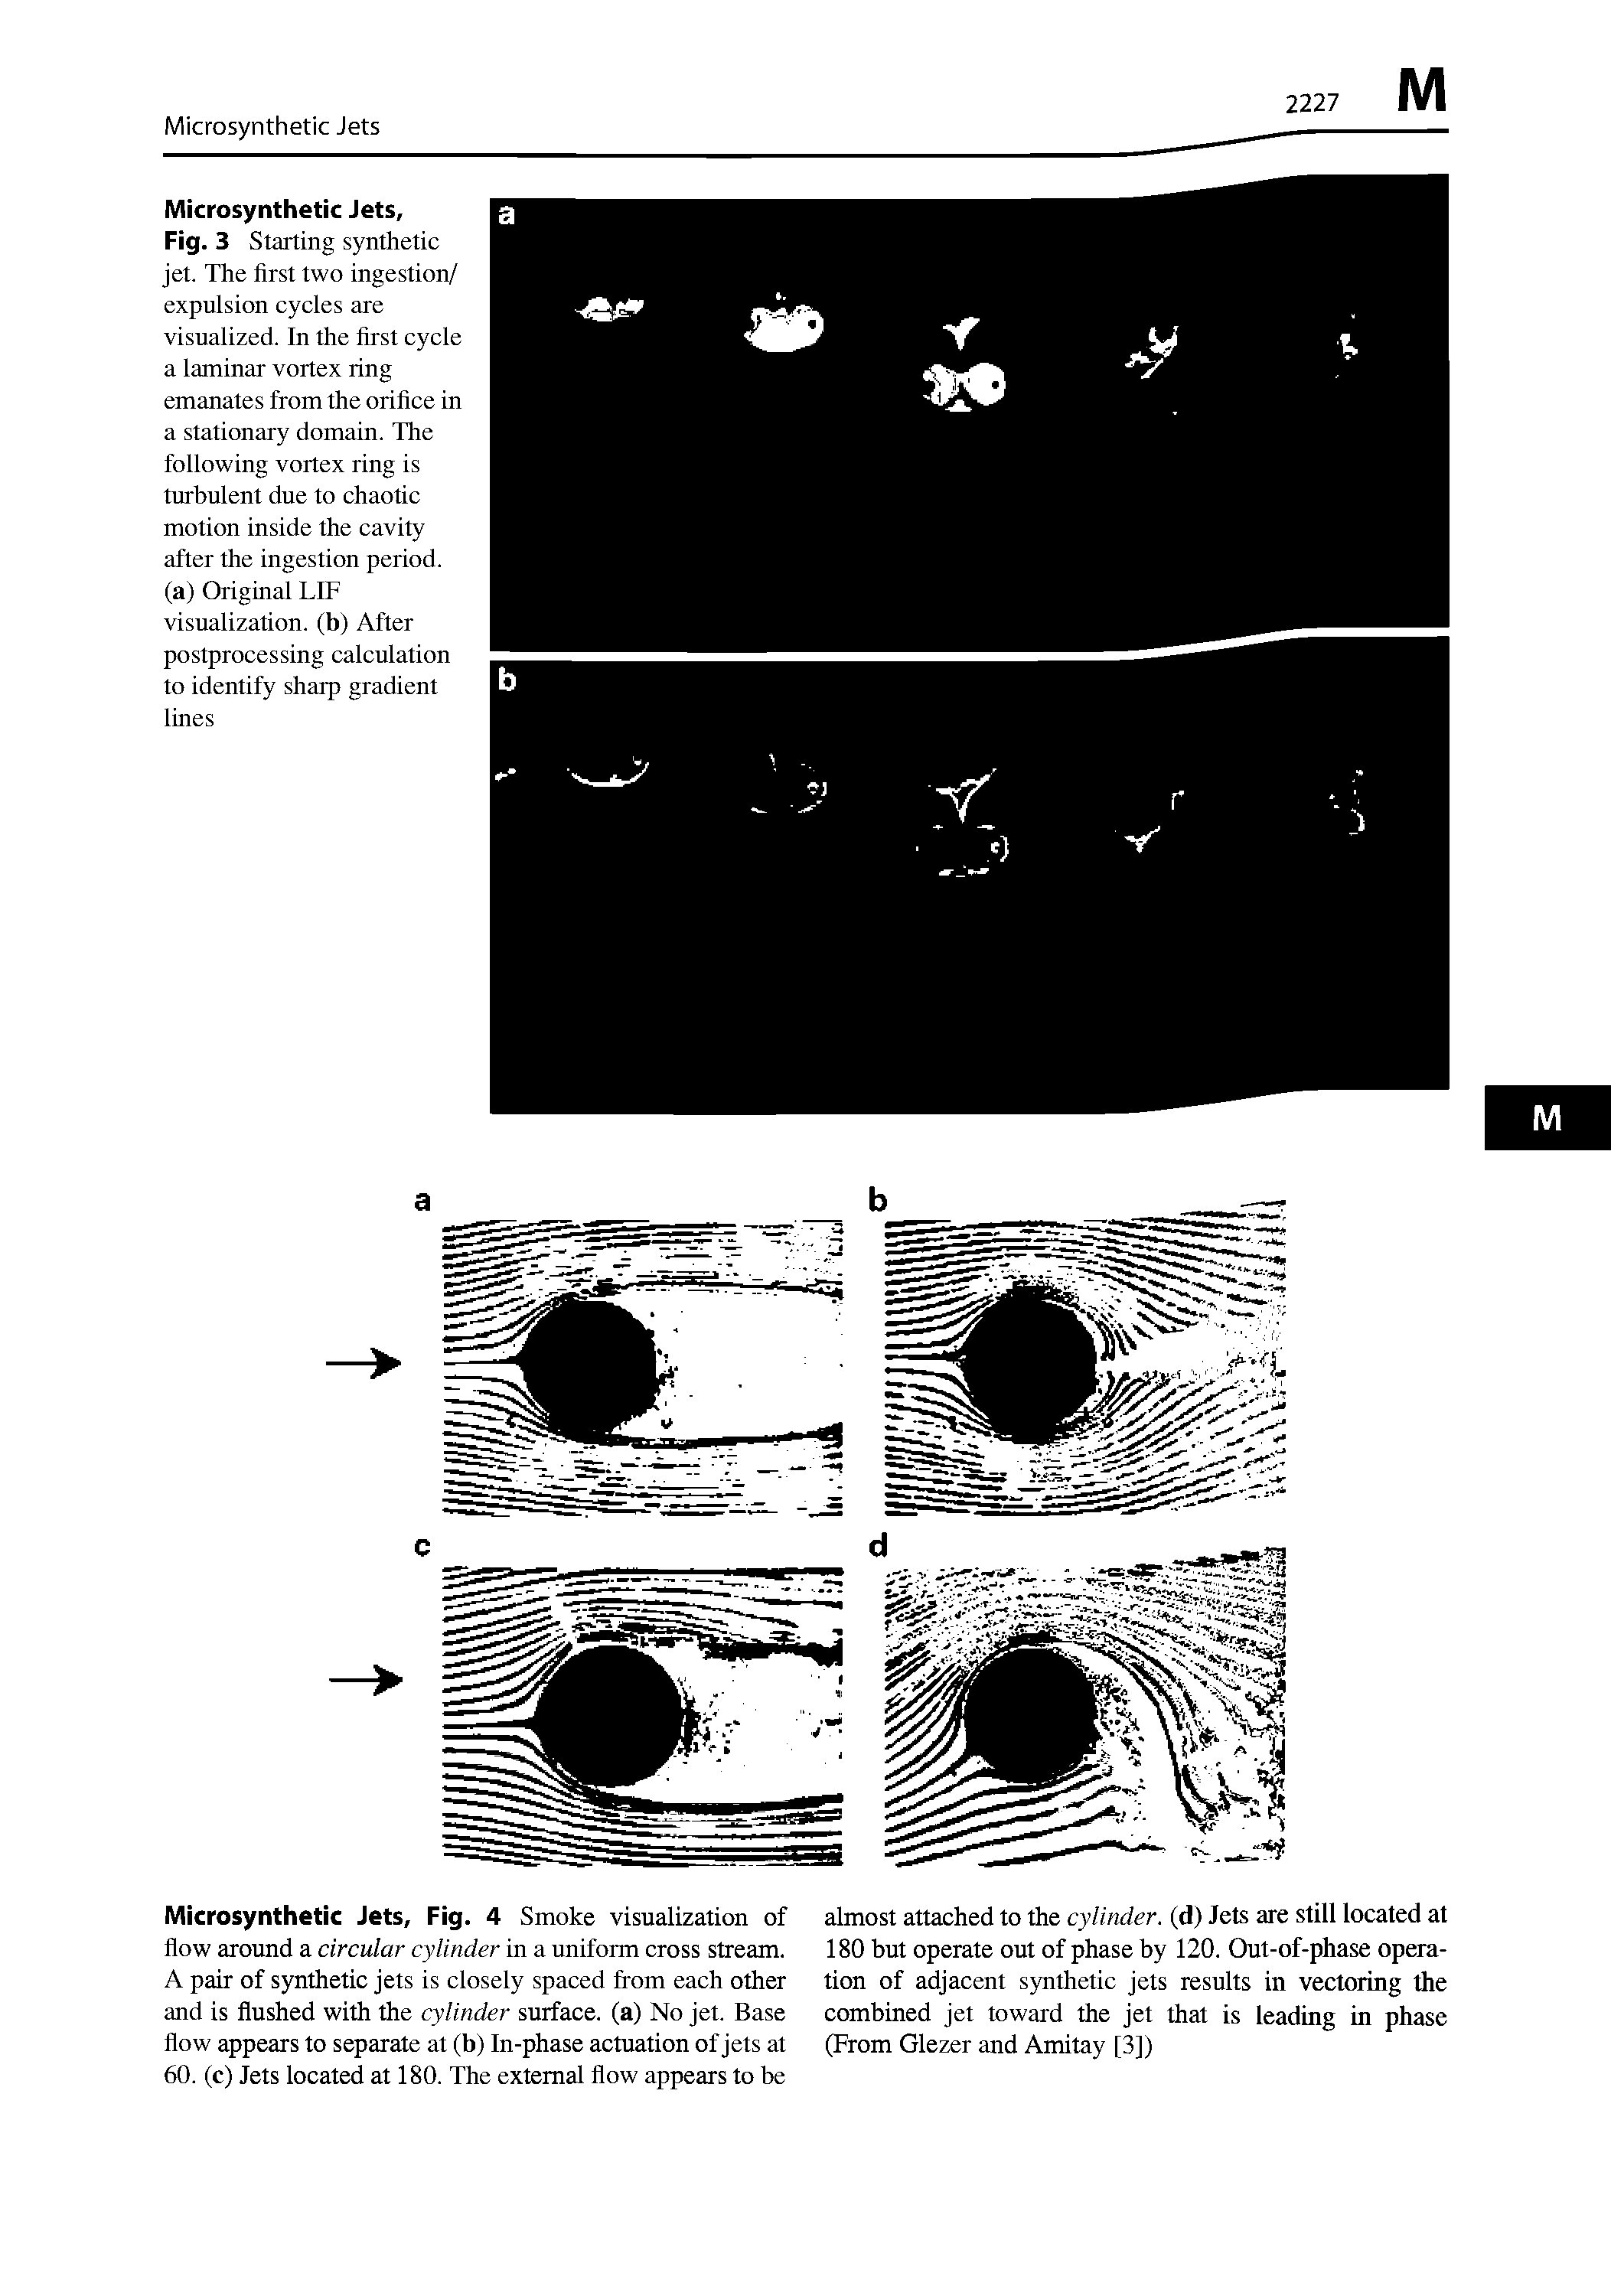 Fig. 3 Starting synthetic jet. The first two ingestion/ expulsion cycles are visualized. In the first cycle a laminar vortex ring emanates from the orifice in a stationary domain. The following vortex ring is turbulent due to chaotic motion inside the cavity after the ingestion period, (a) Original LIT visualization, (b) After postprocessing calculation to identify sharp gradient lines...